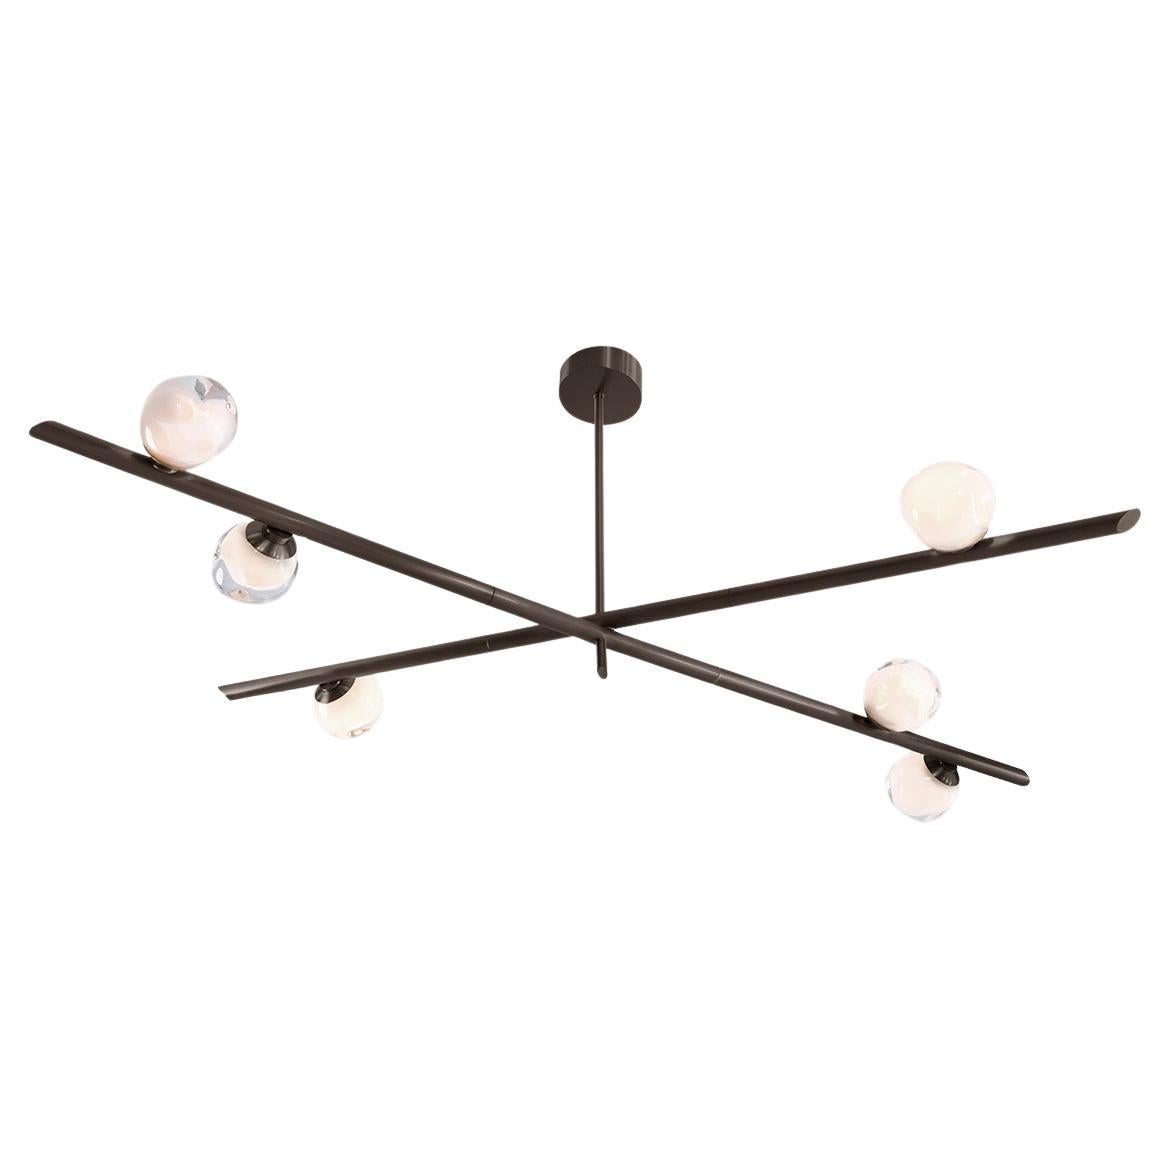 Antares Ceiling Light by Gaspare Asaro-Brunito Nero Finish For Sale